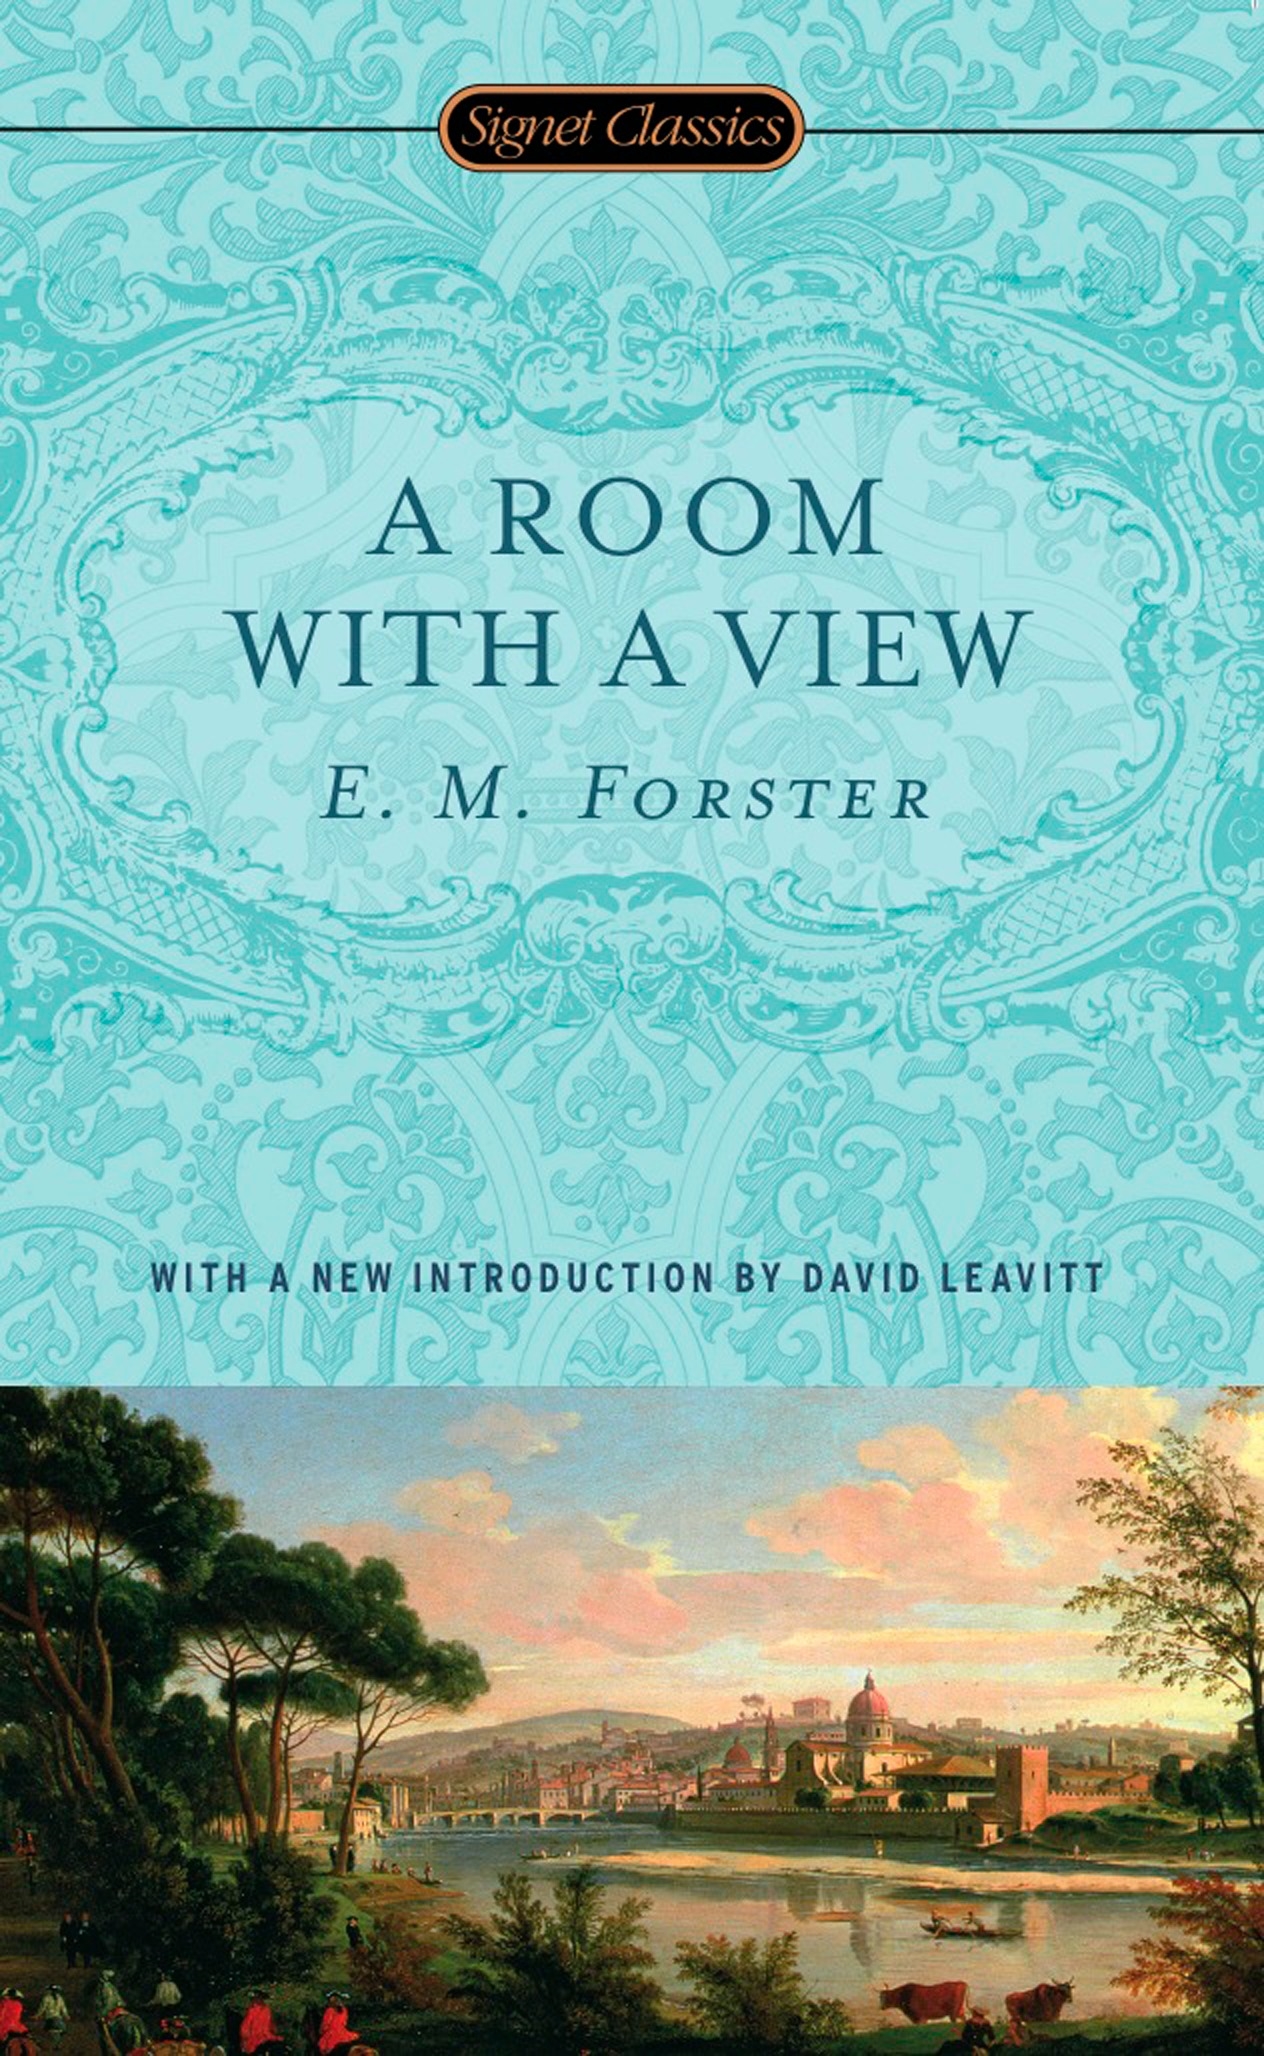 book review room with a view